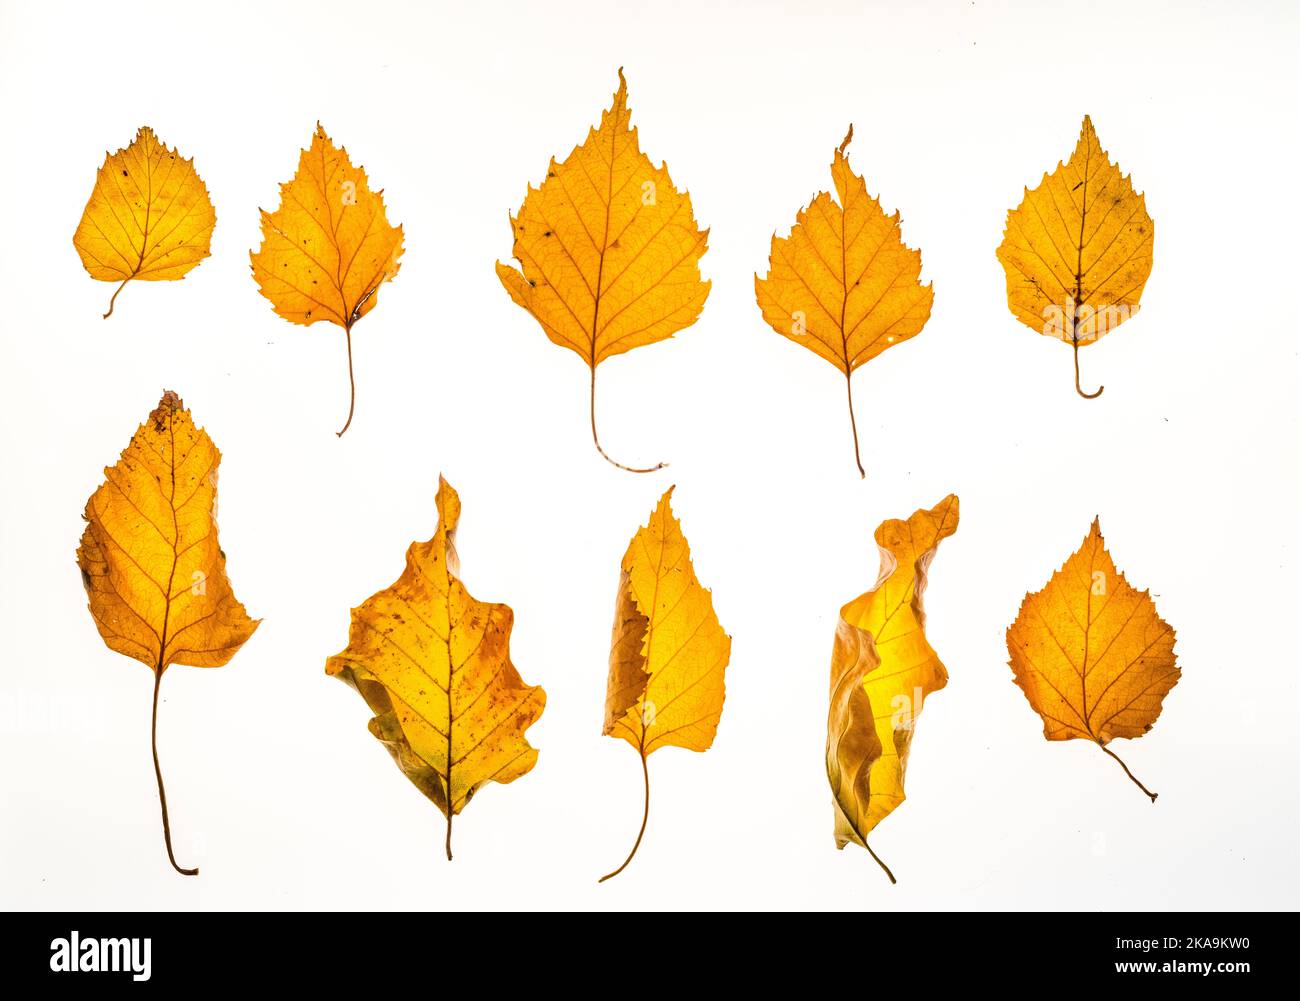 Golden yellowy Silver birch and oak autumn leaves from trees in the UK Stock Photo